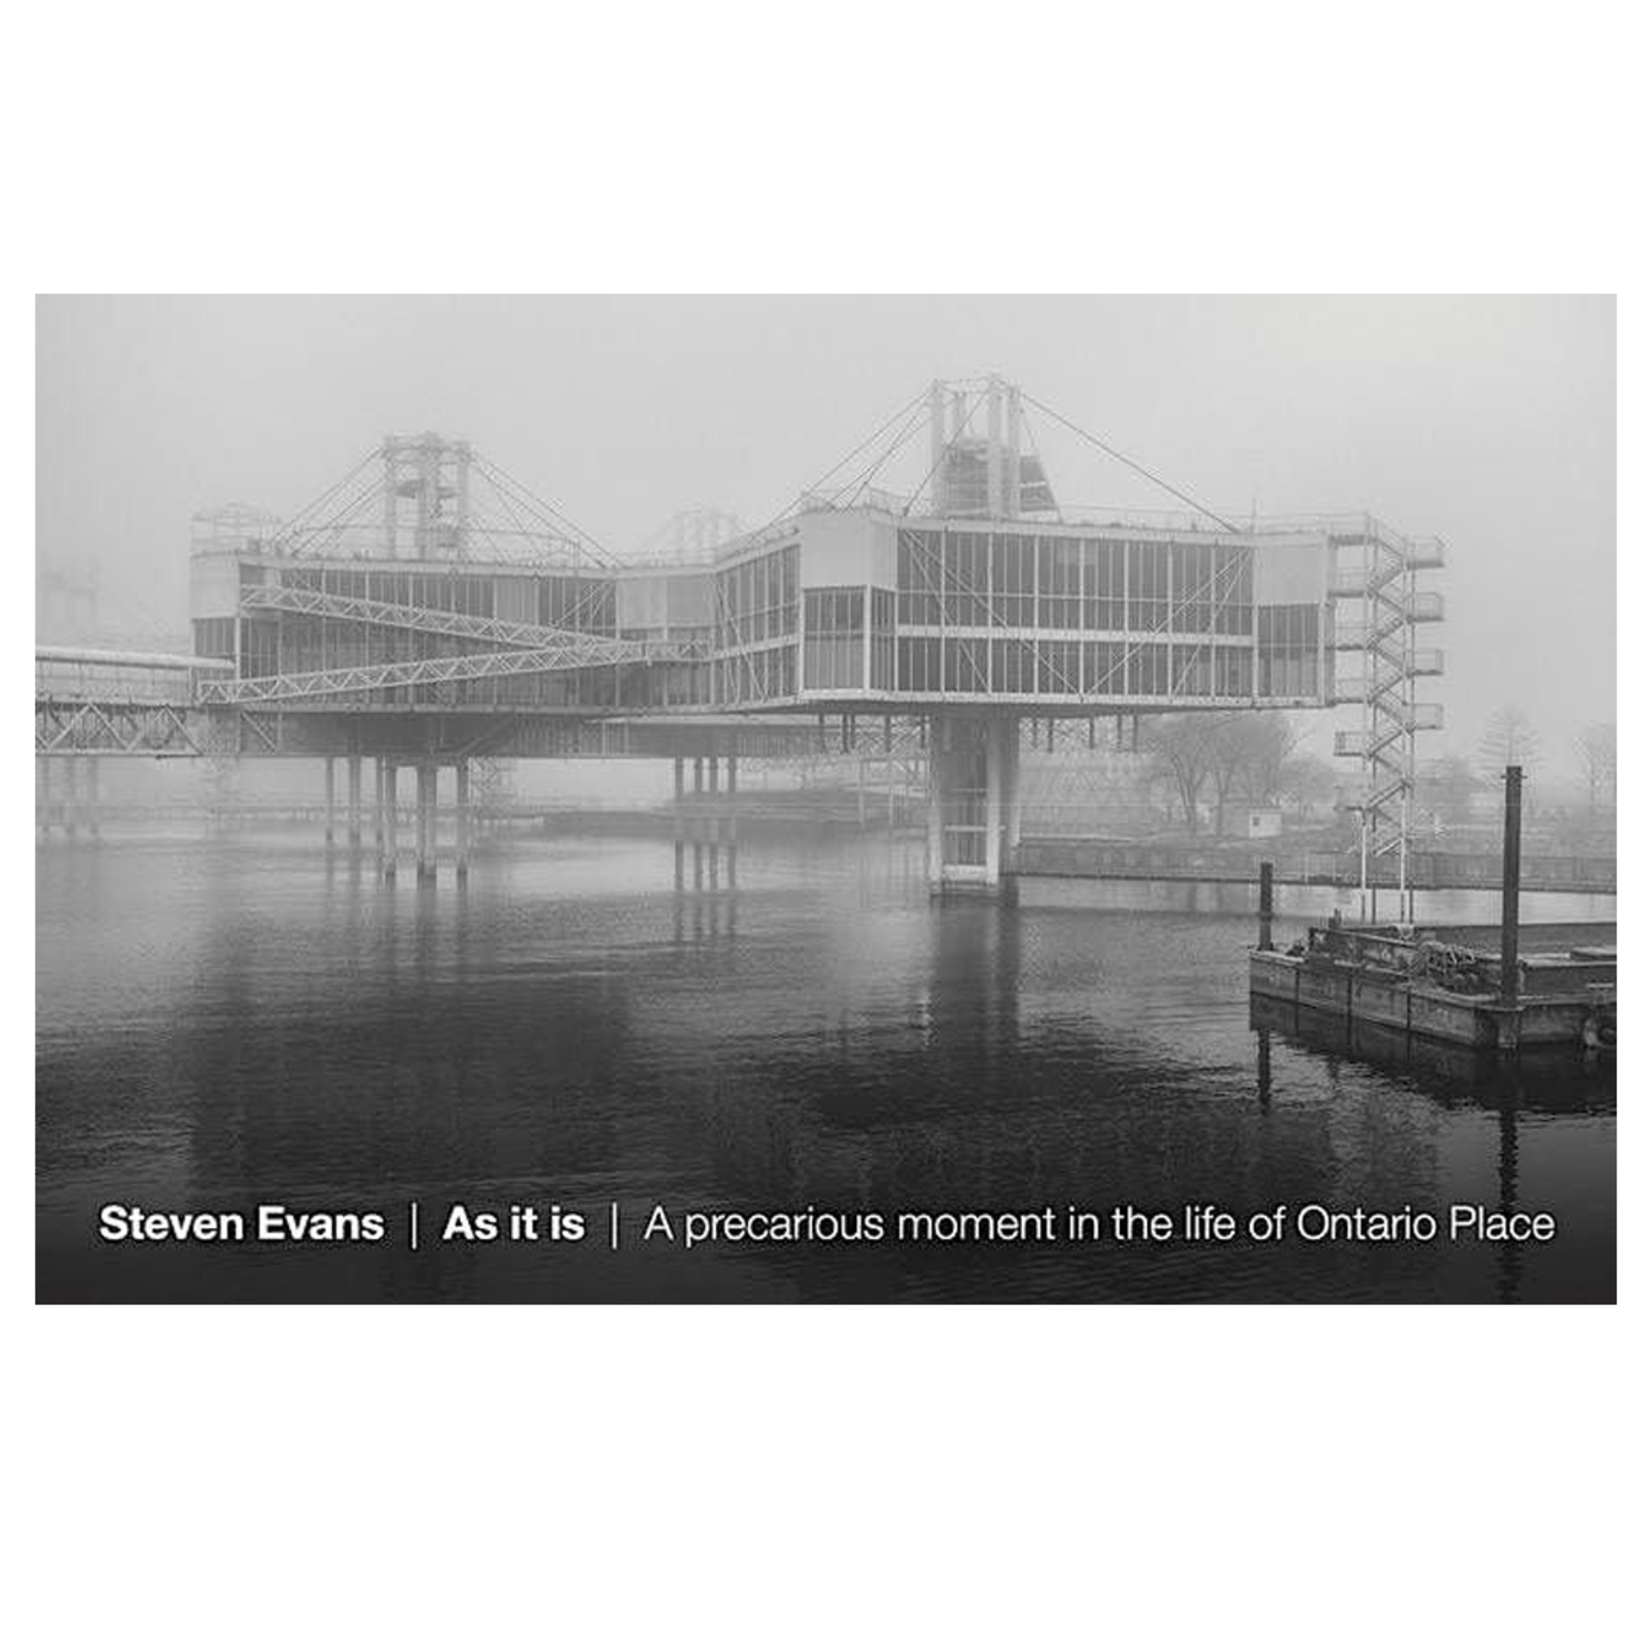 Steven Evans  As it is | A precarious moment in the life of Ontario Place